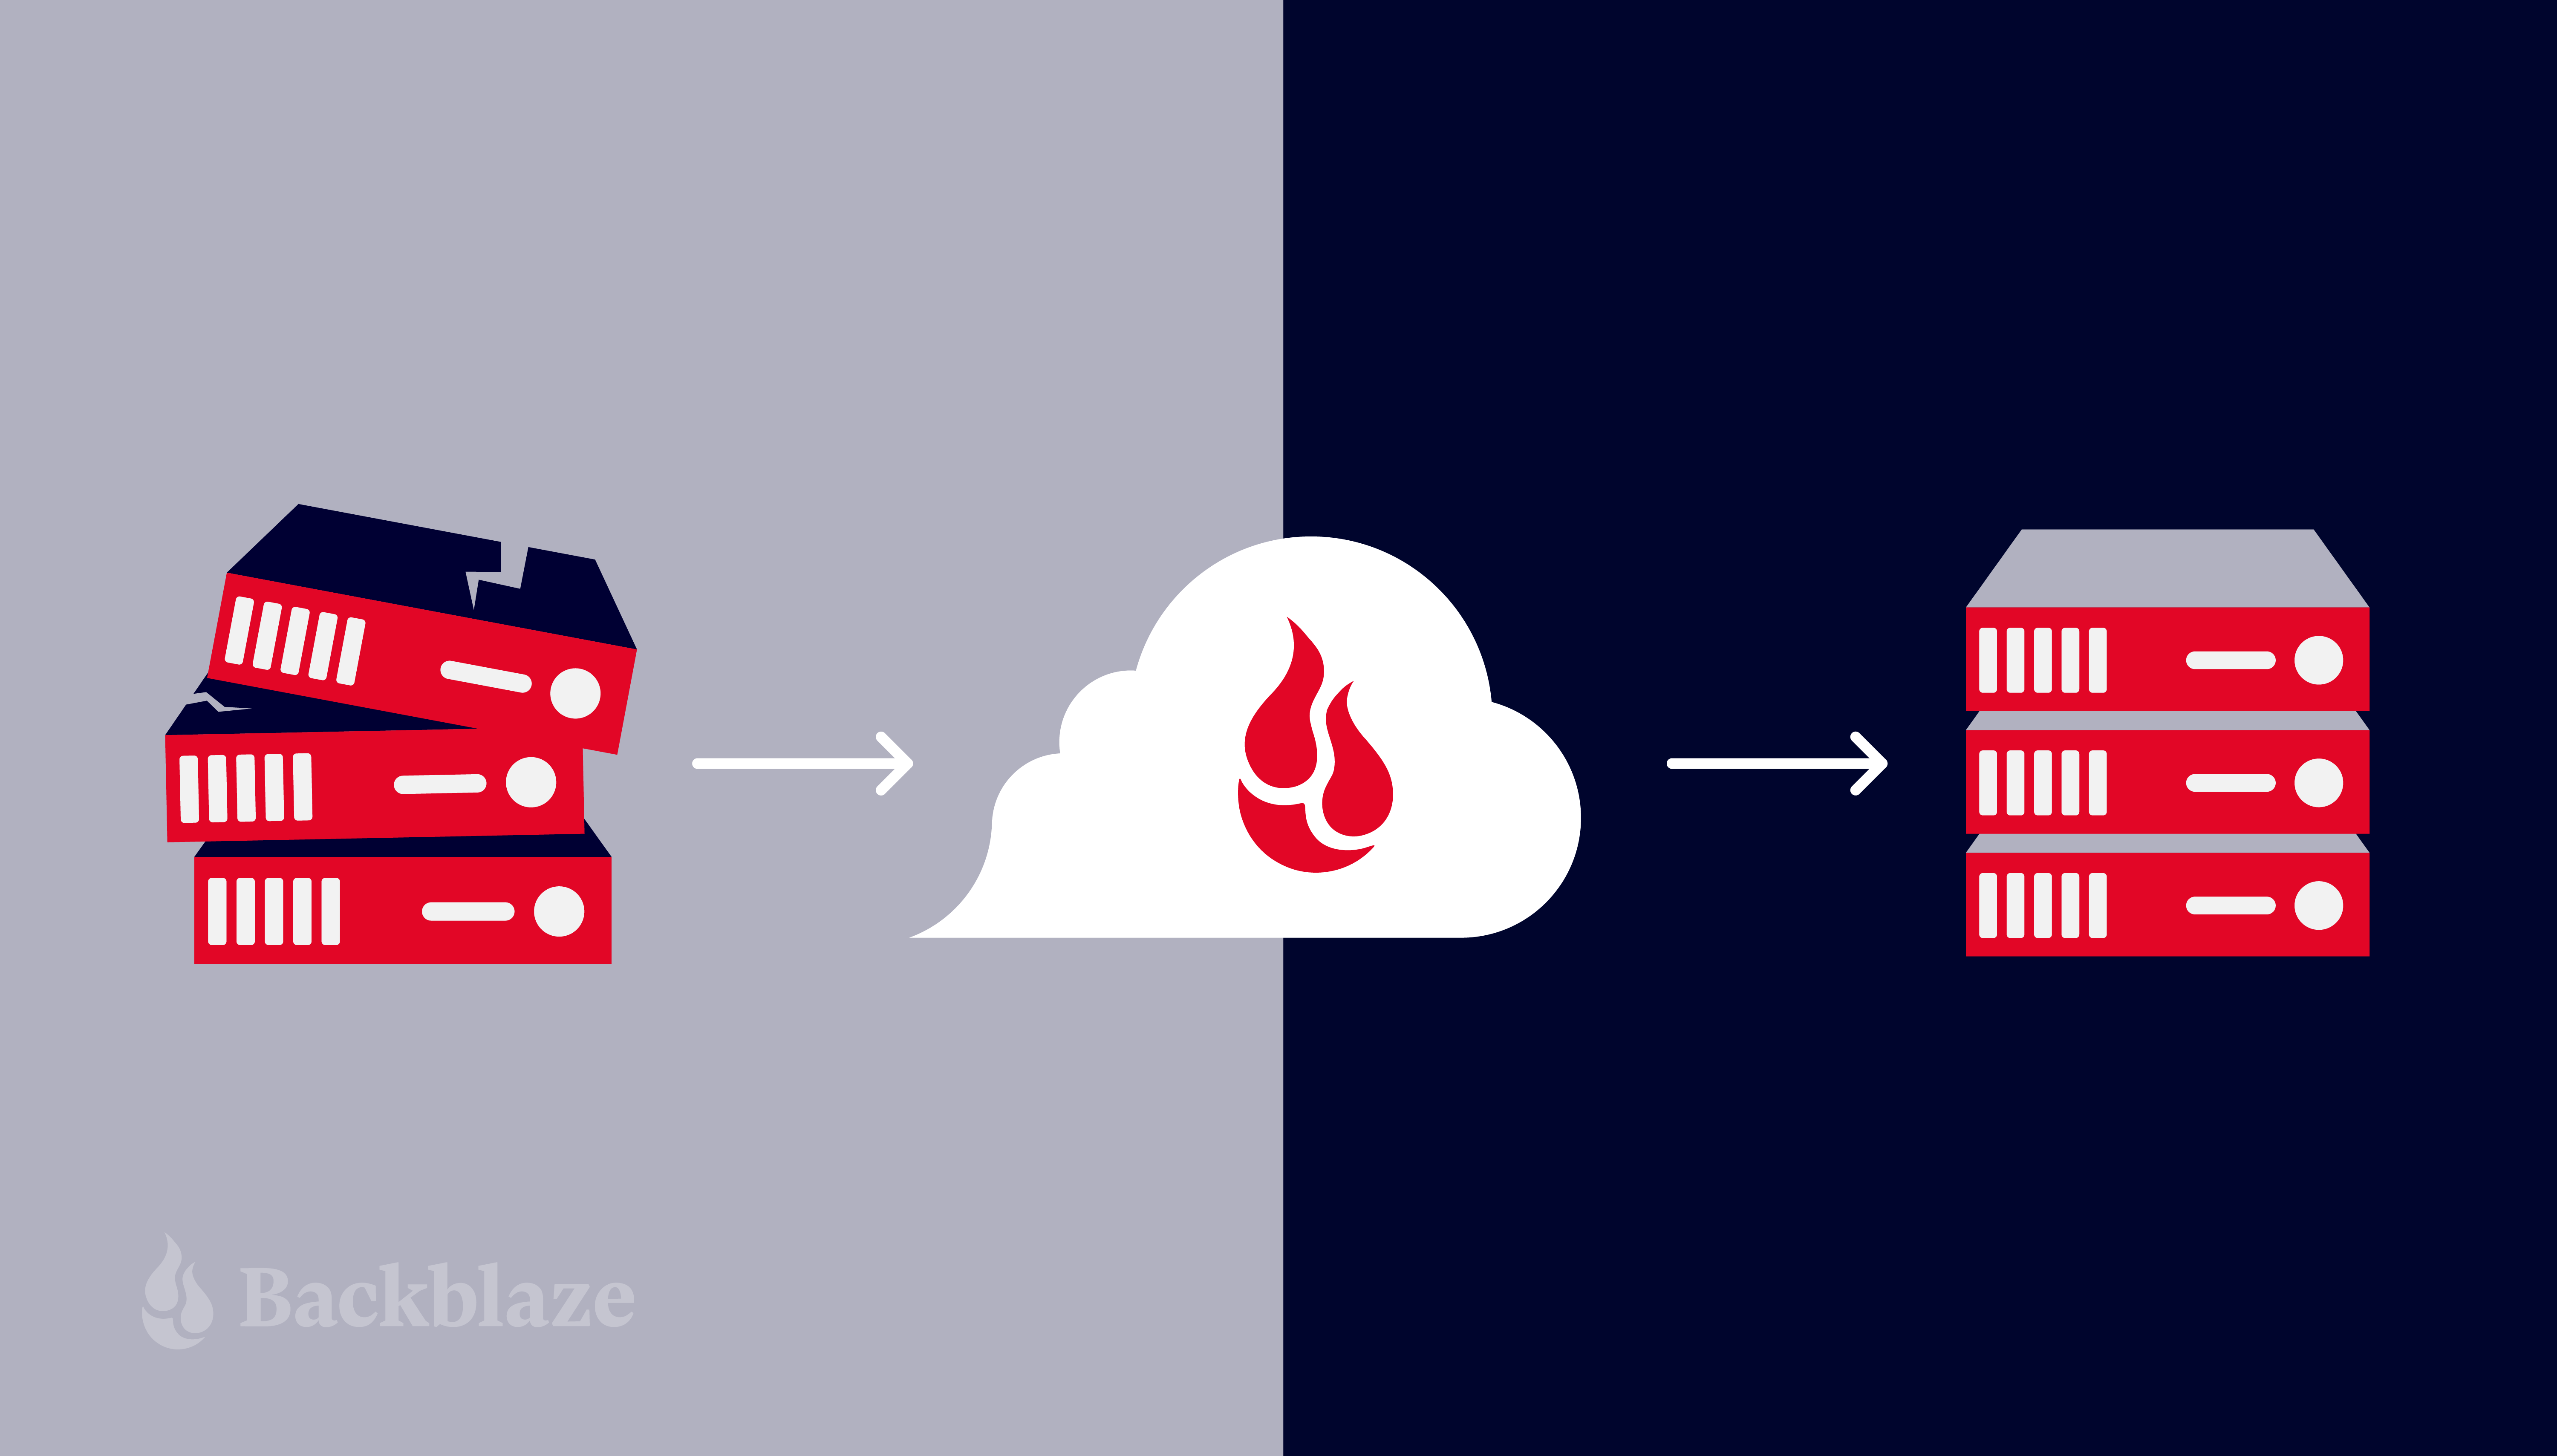 A decorative image with a broken server stack icon on one side, the cloud in the middle, then a fixed server icon on the right.